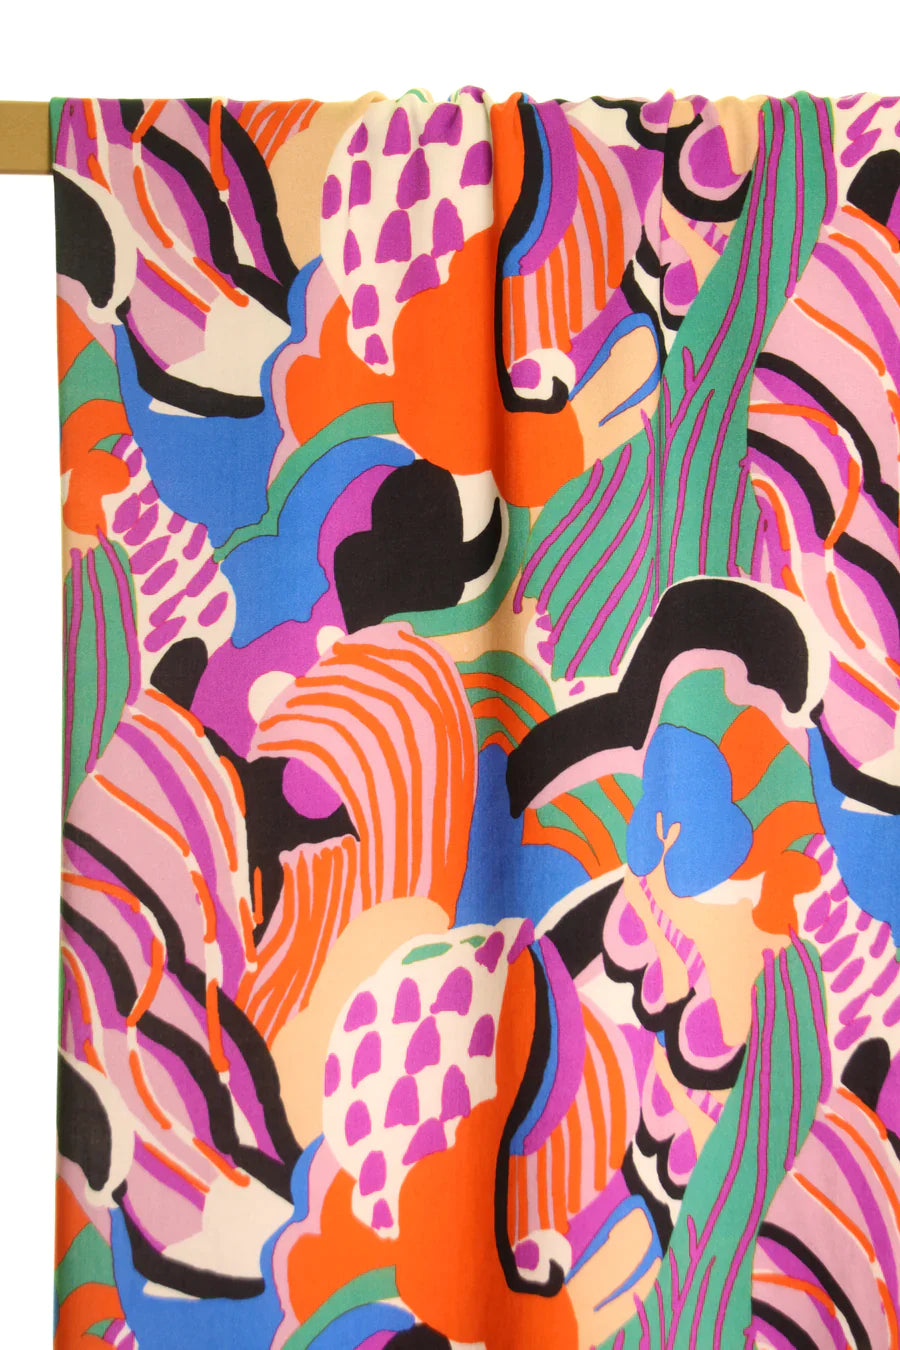 Atelier Jupe - Colourful Artistic Print Fabric